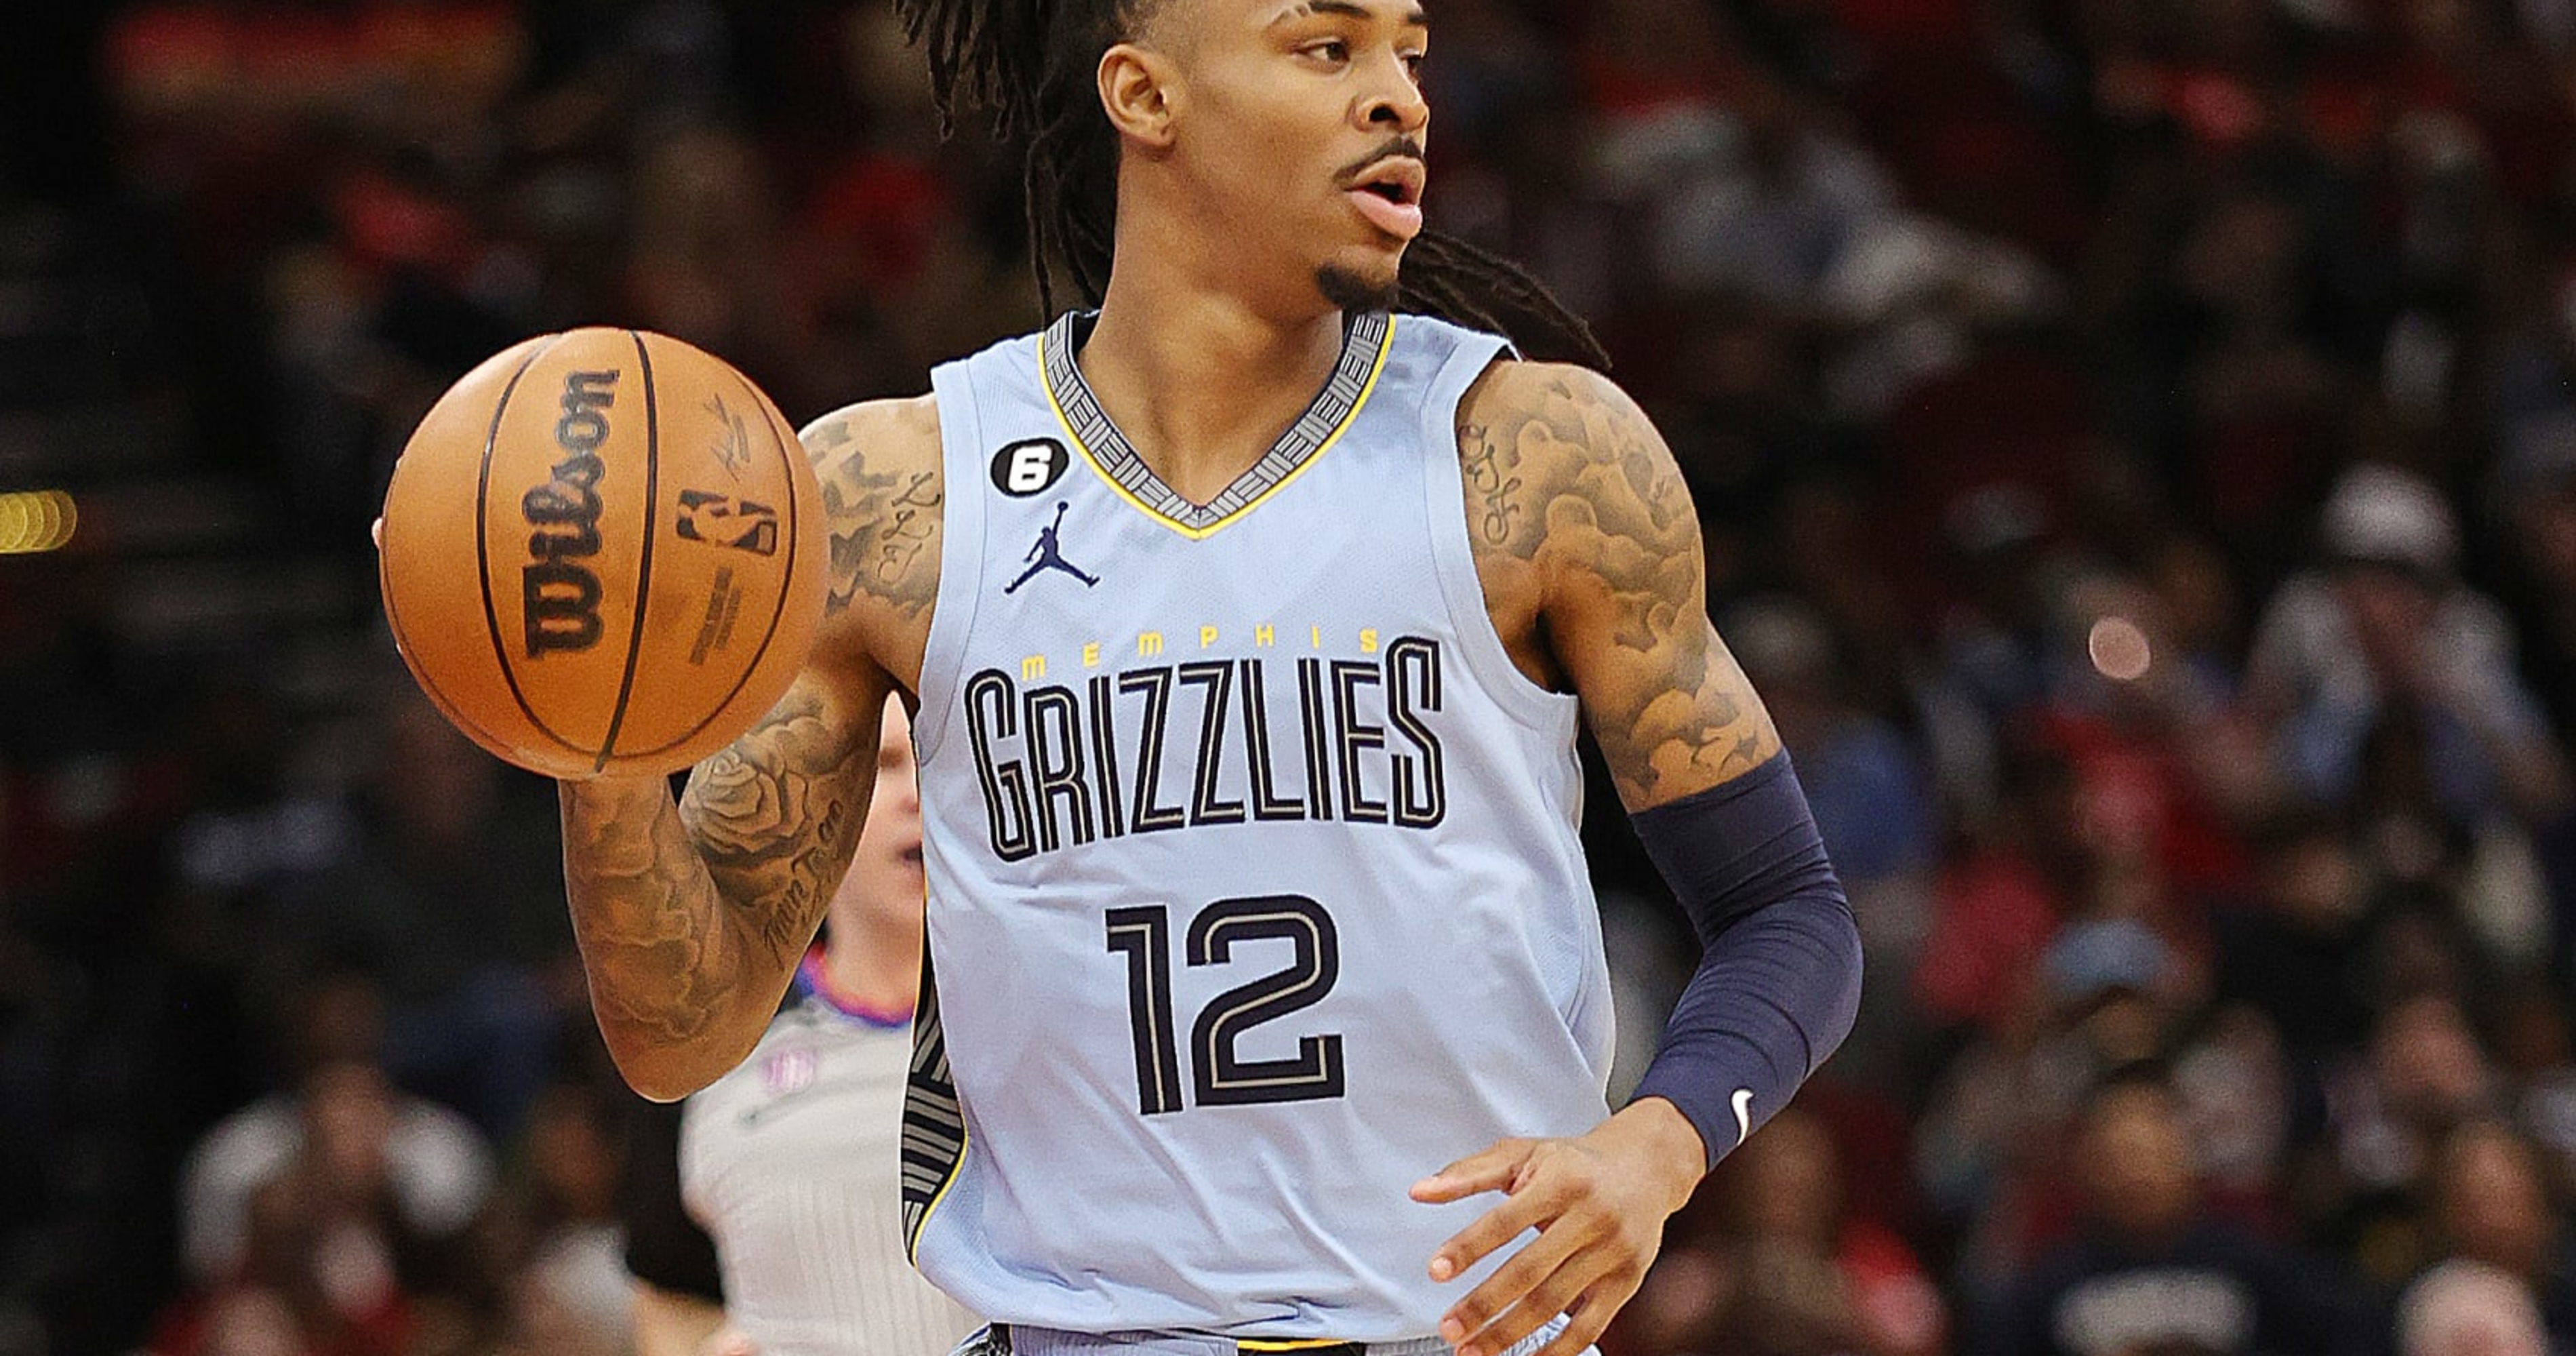 Grizzlies' Ja Morant responds after second video appearing to hold gun:  'Continuing to work on myself